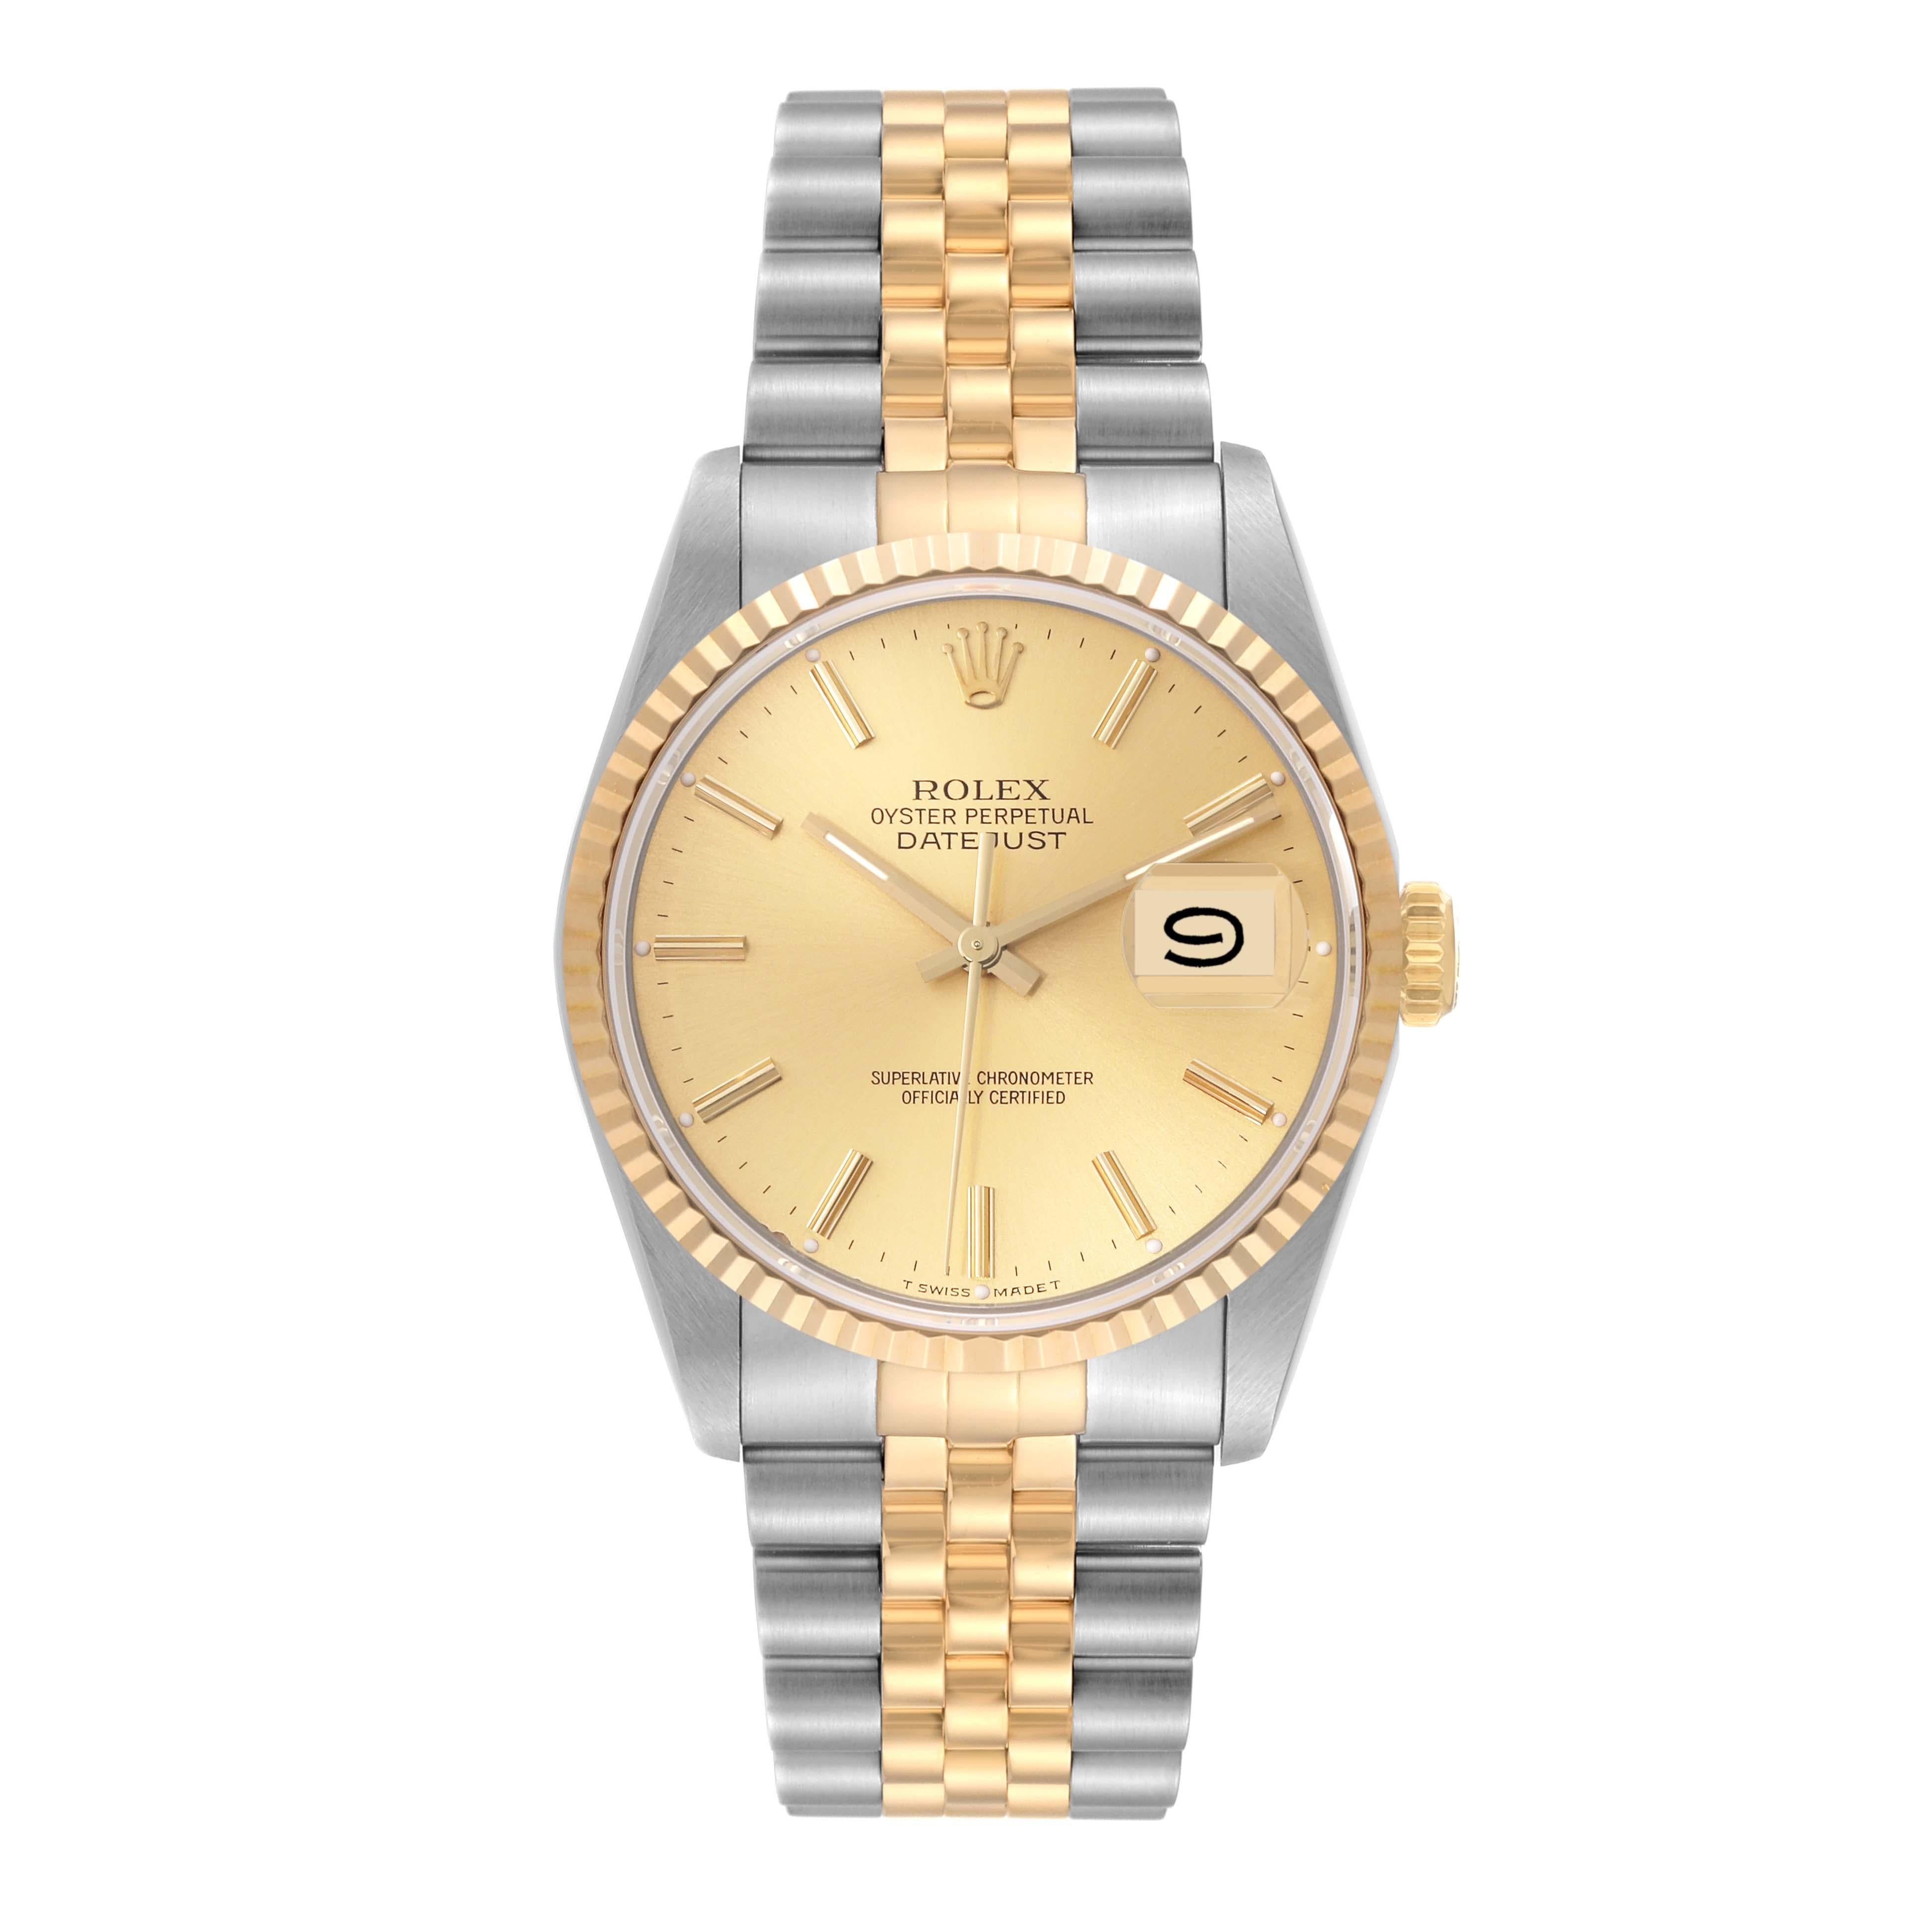 Rolex Datejust 36 Steel Yellow Gold Champagne Dial Mens Watch 16233 Box Papers In Good Condition For Sale In Atlanta, GA